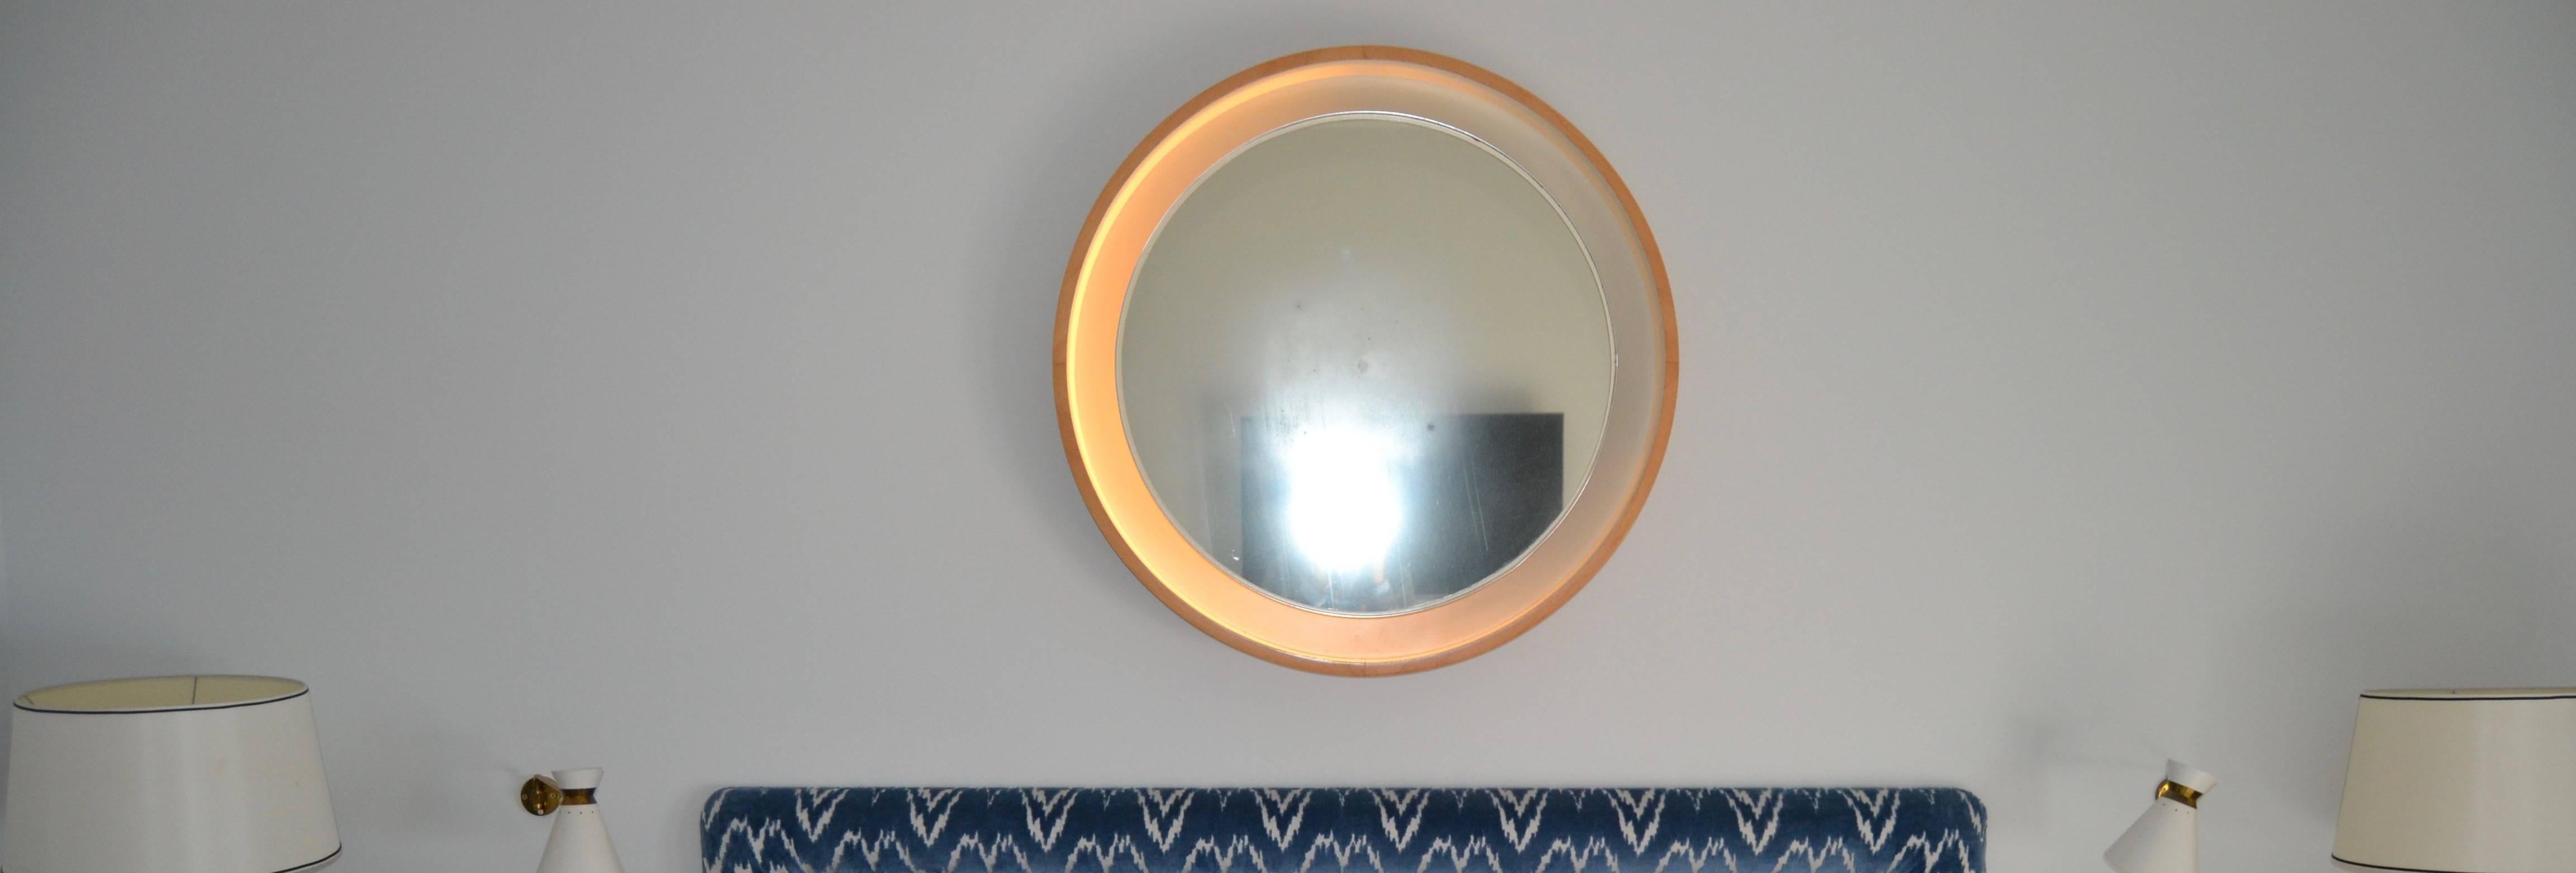 1970s Large Lighted Round Mirror 1